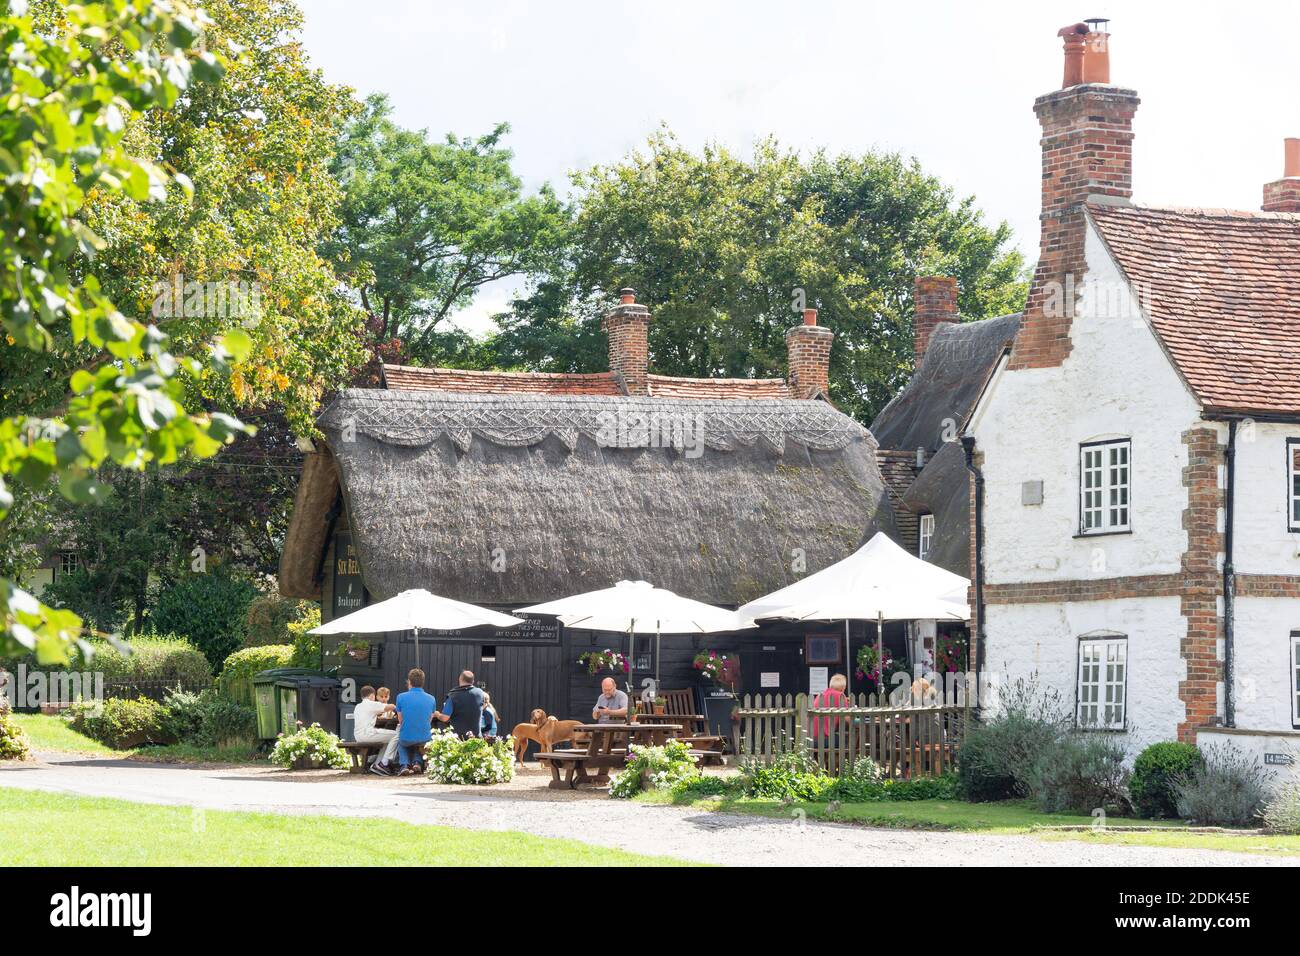 17th century The Six Bells Pub, The Green South, Warborough, Oxfordshire, England, United Kingdom Stock Photo